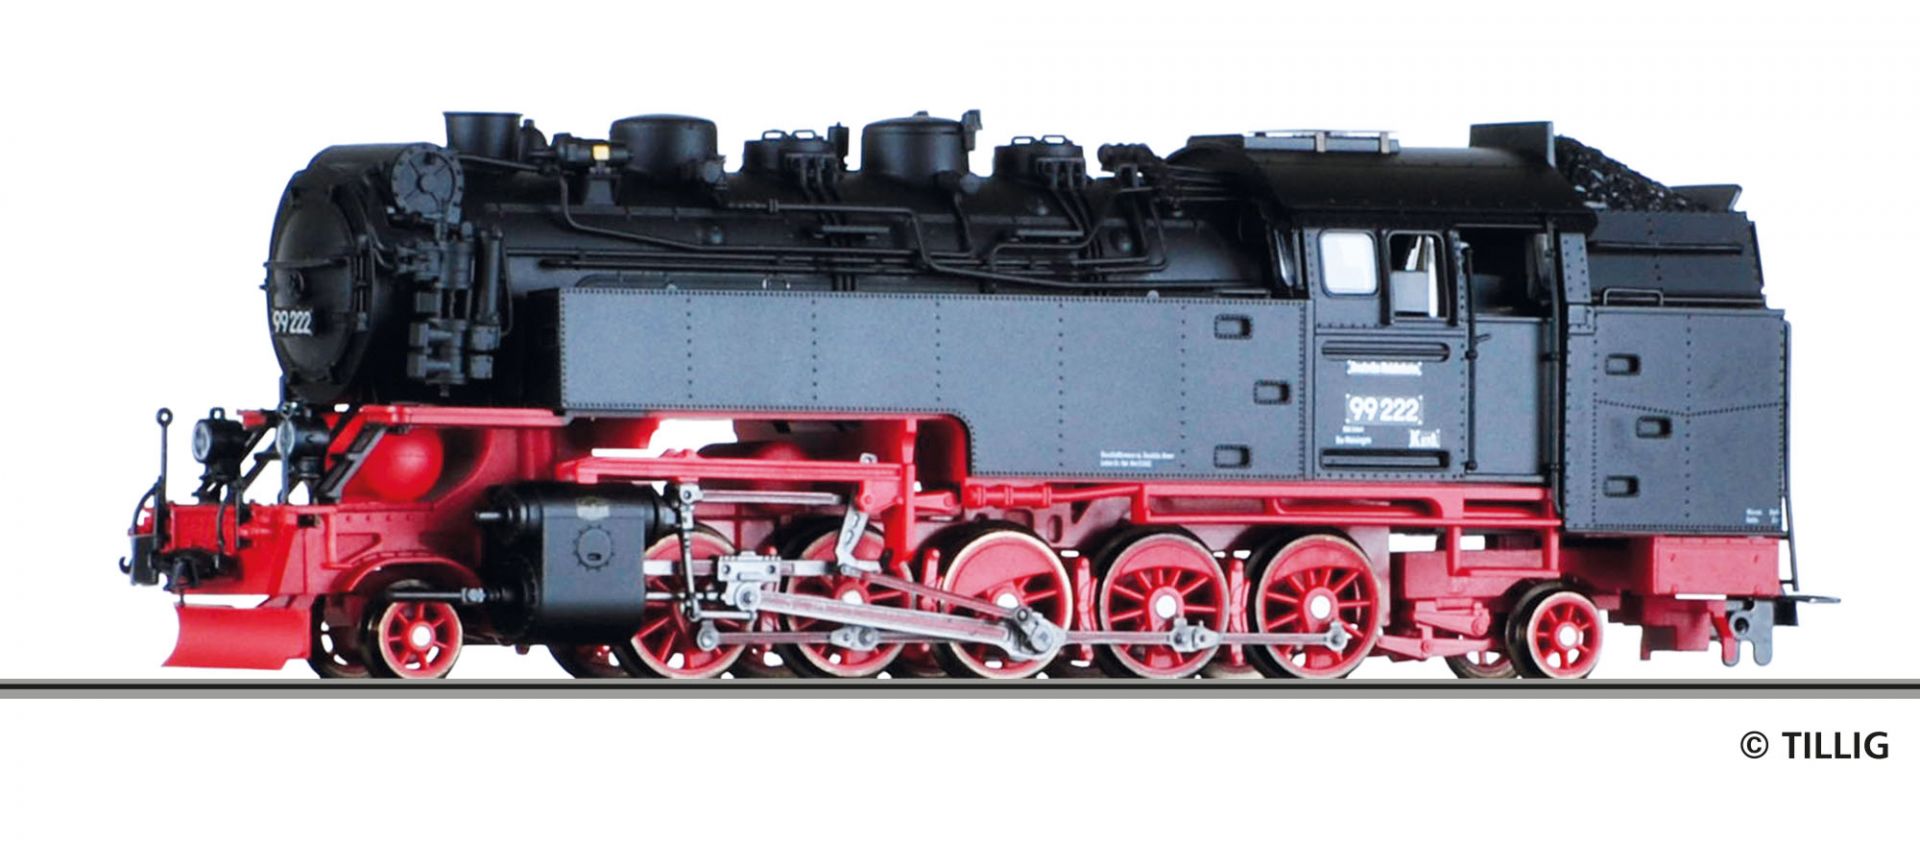 02928 | Steam locomotive DR -sold out-